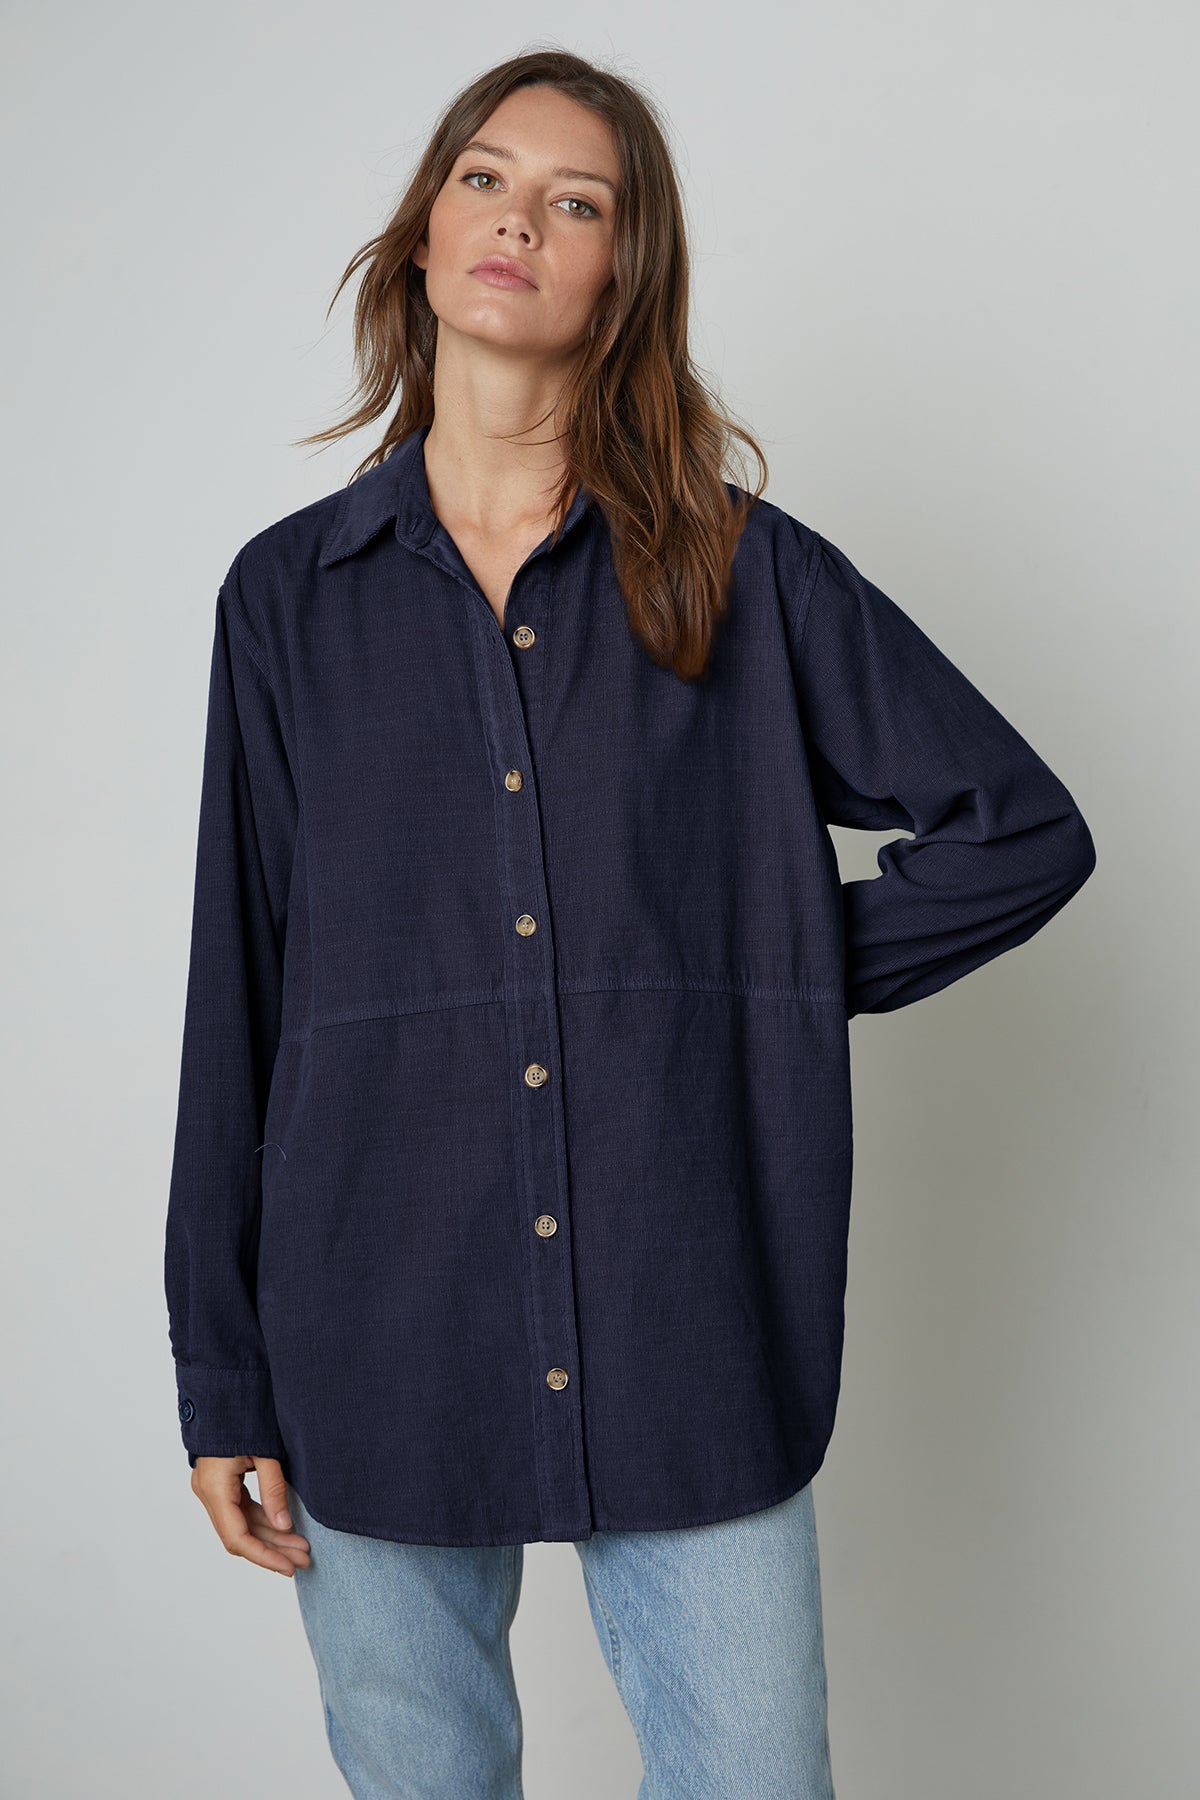 Jeslyn Corduroy Button-Up Shirt in dark blue night color front-25052438298817